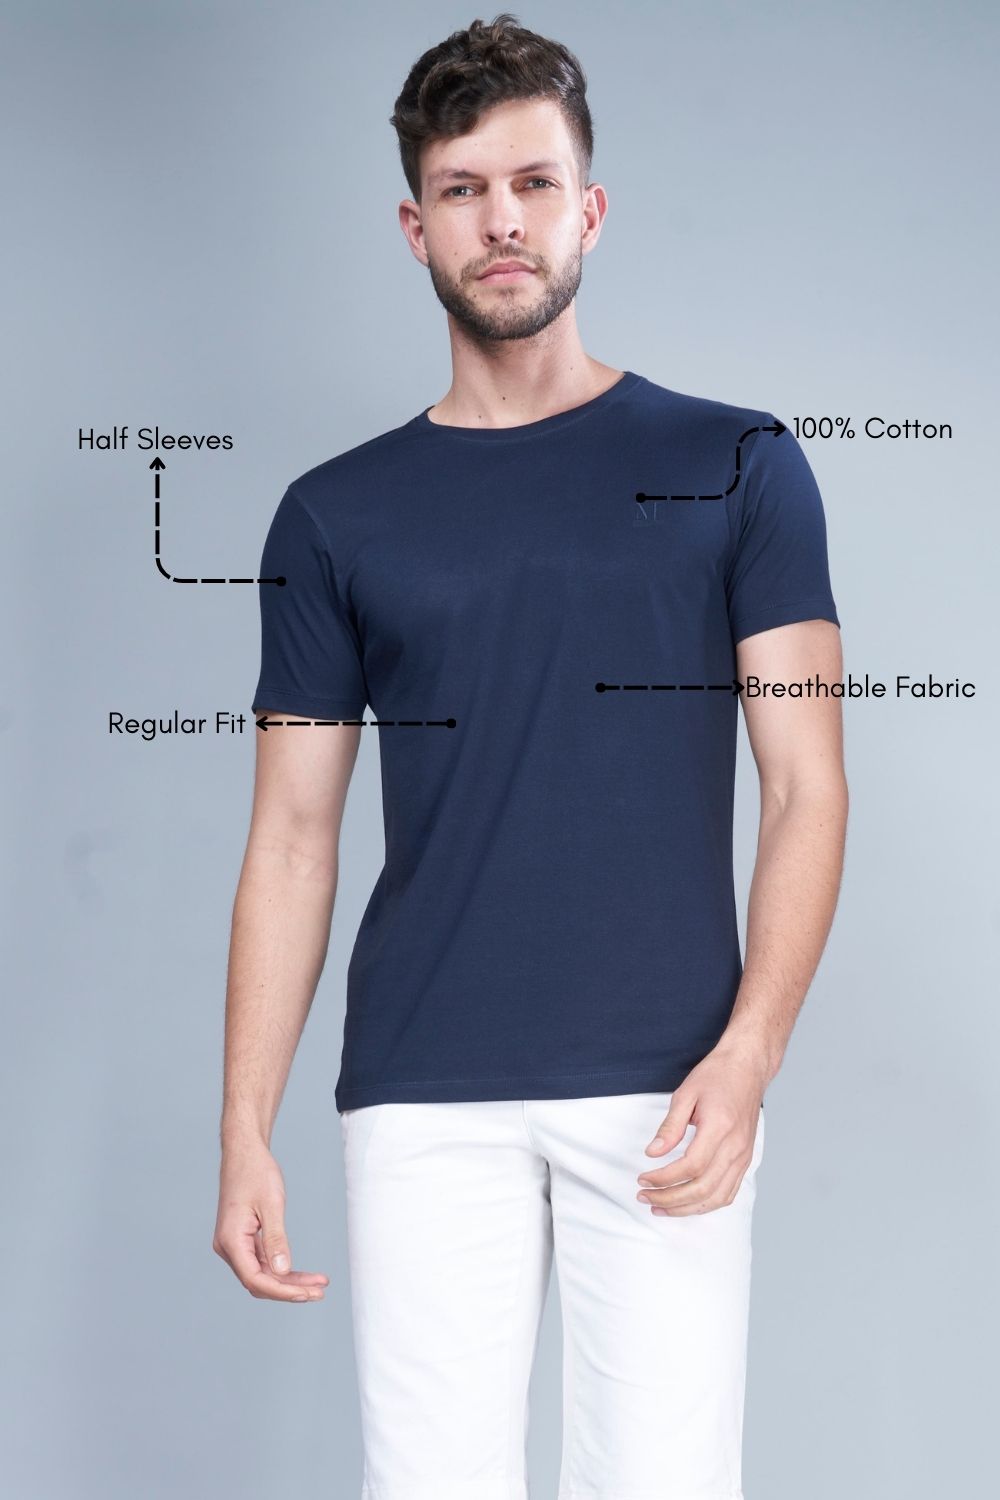 Teal Navy colored, solid t shirt for men with round neck and half sleeves, product feature.